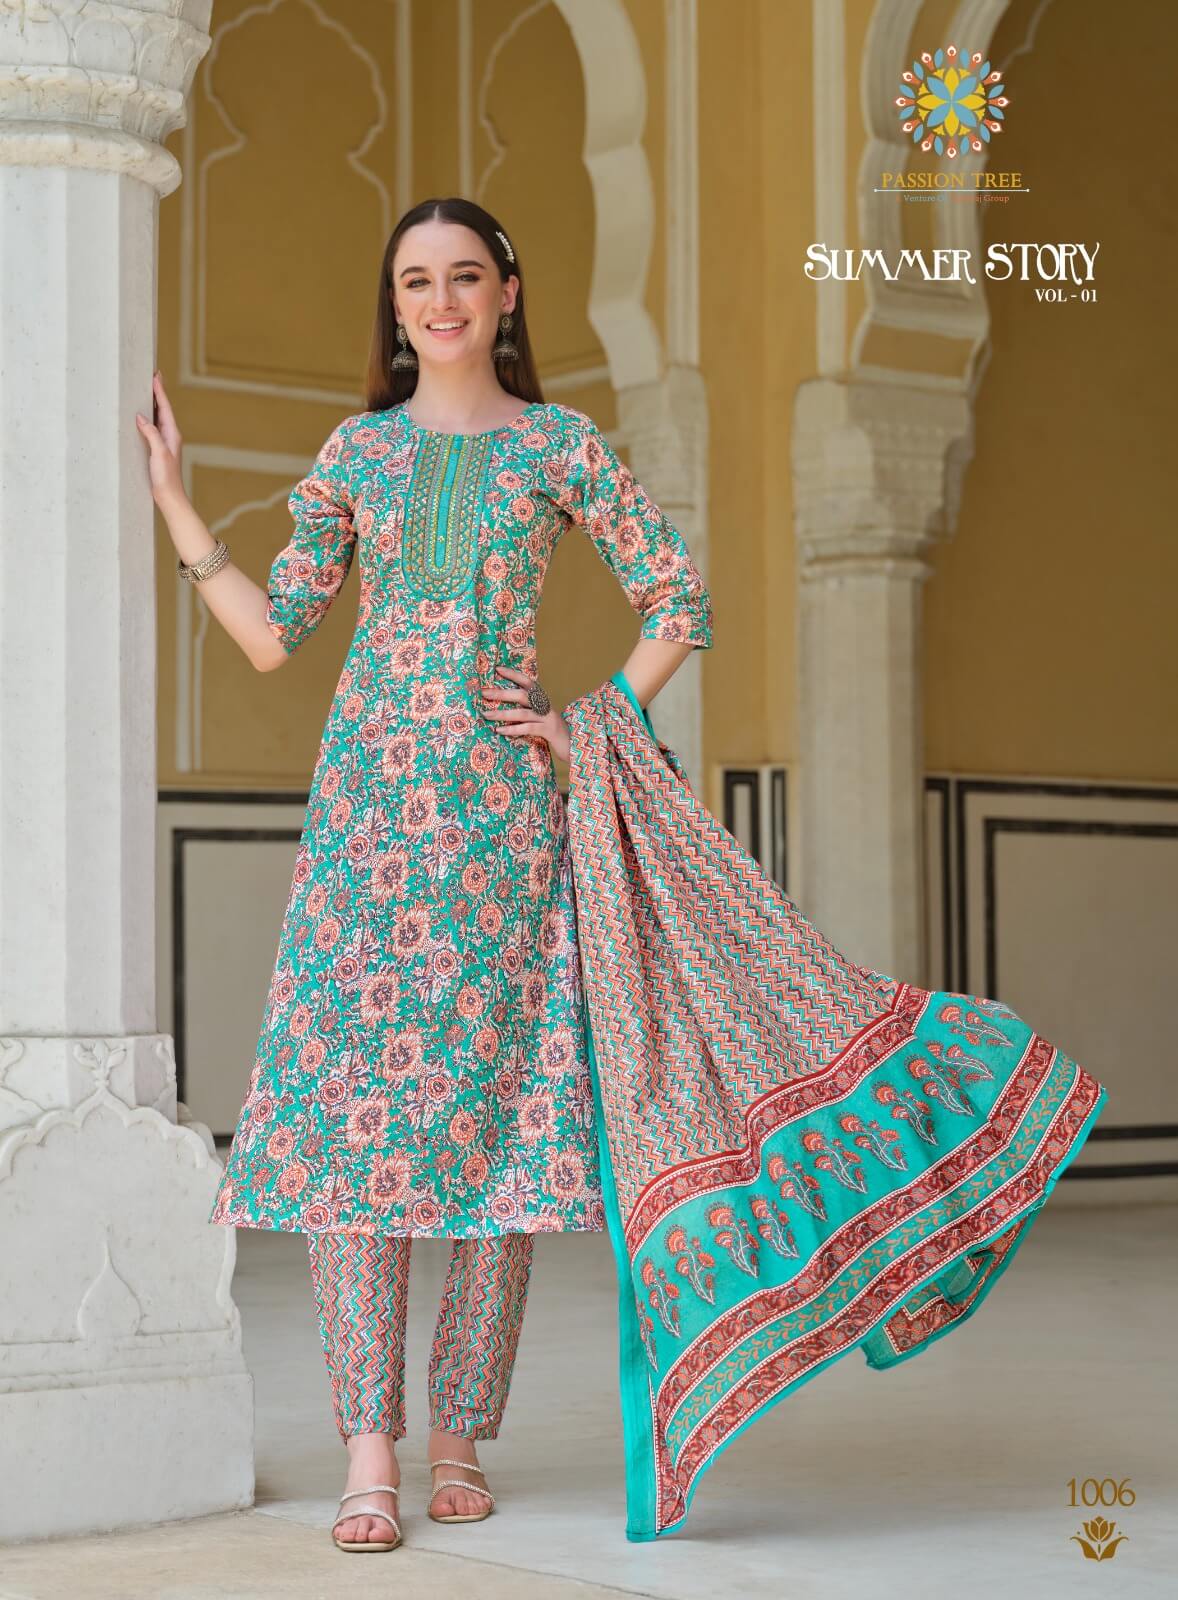 Passion Tree Summer Story vol 1 Printed Salwar Kameez collection 2